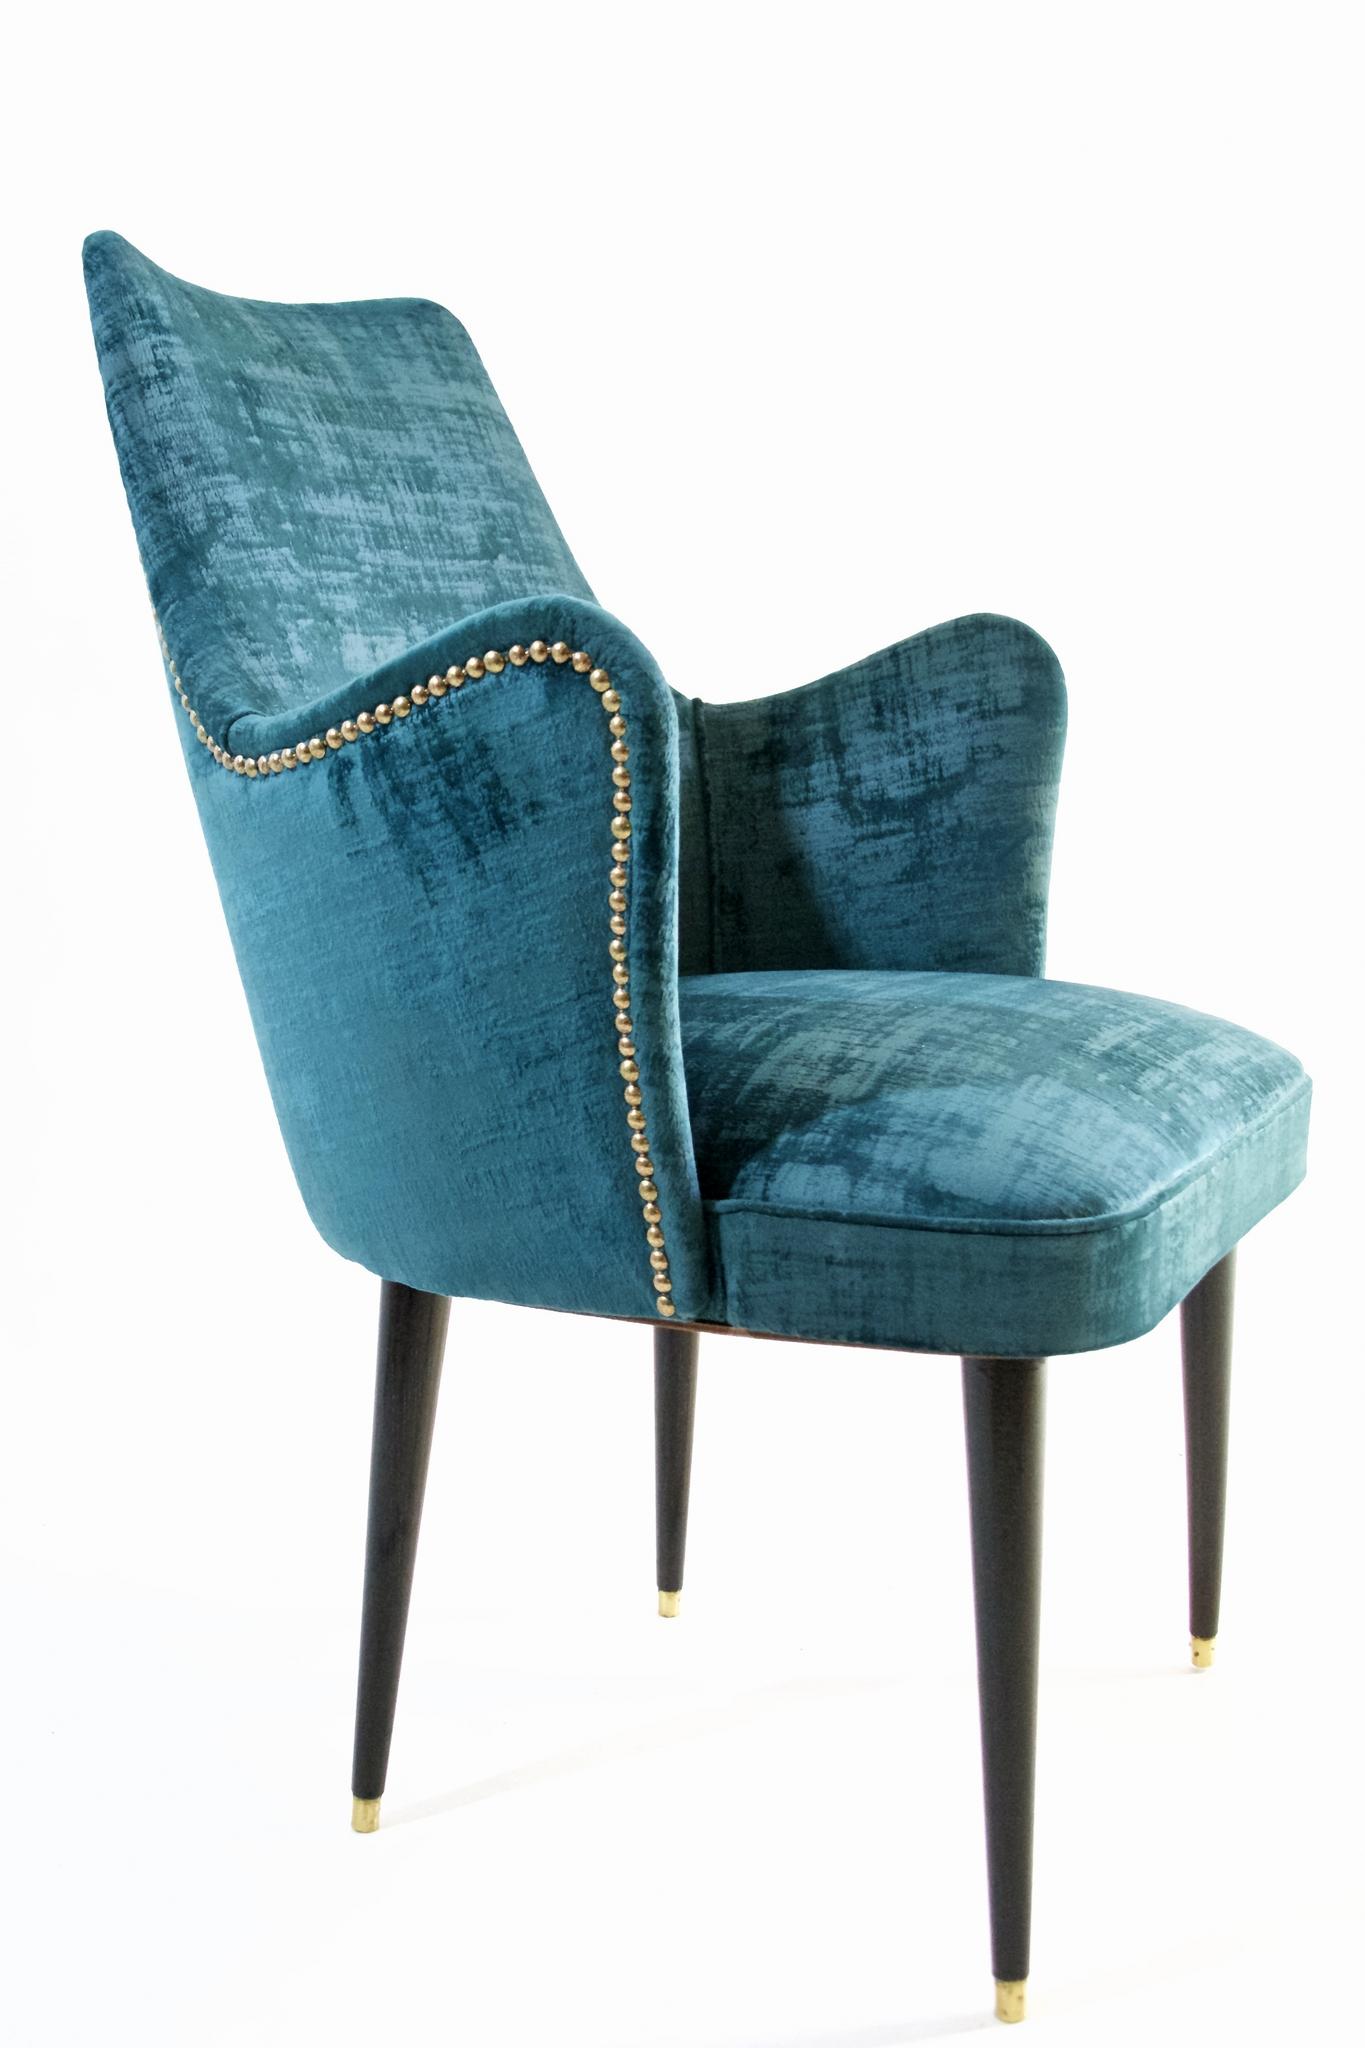 These chairs was designed by Osvaldo Borsani in the 1950s has been professionally restored and reupholstered. The fabric used is a high quality strong teal colored velvet that is easy to remove stains from. They have stained and lacquered wood legs